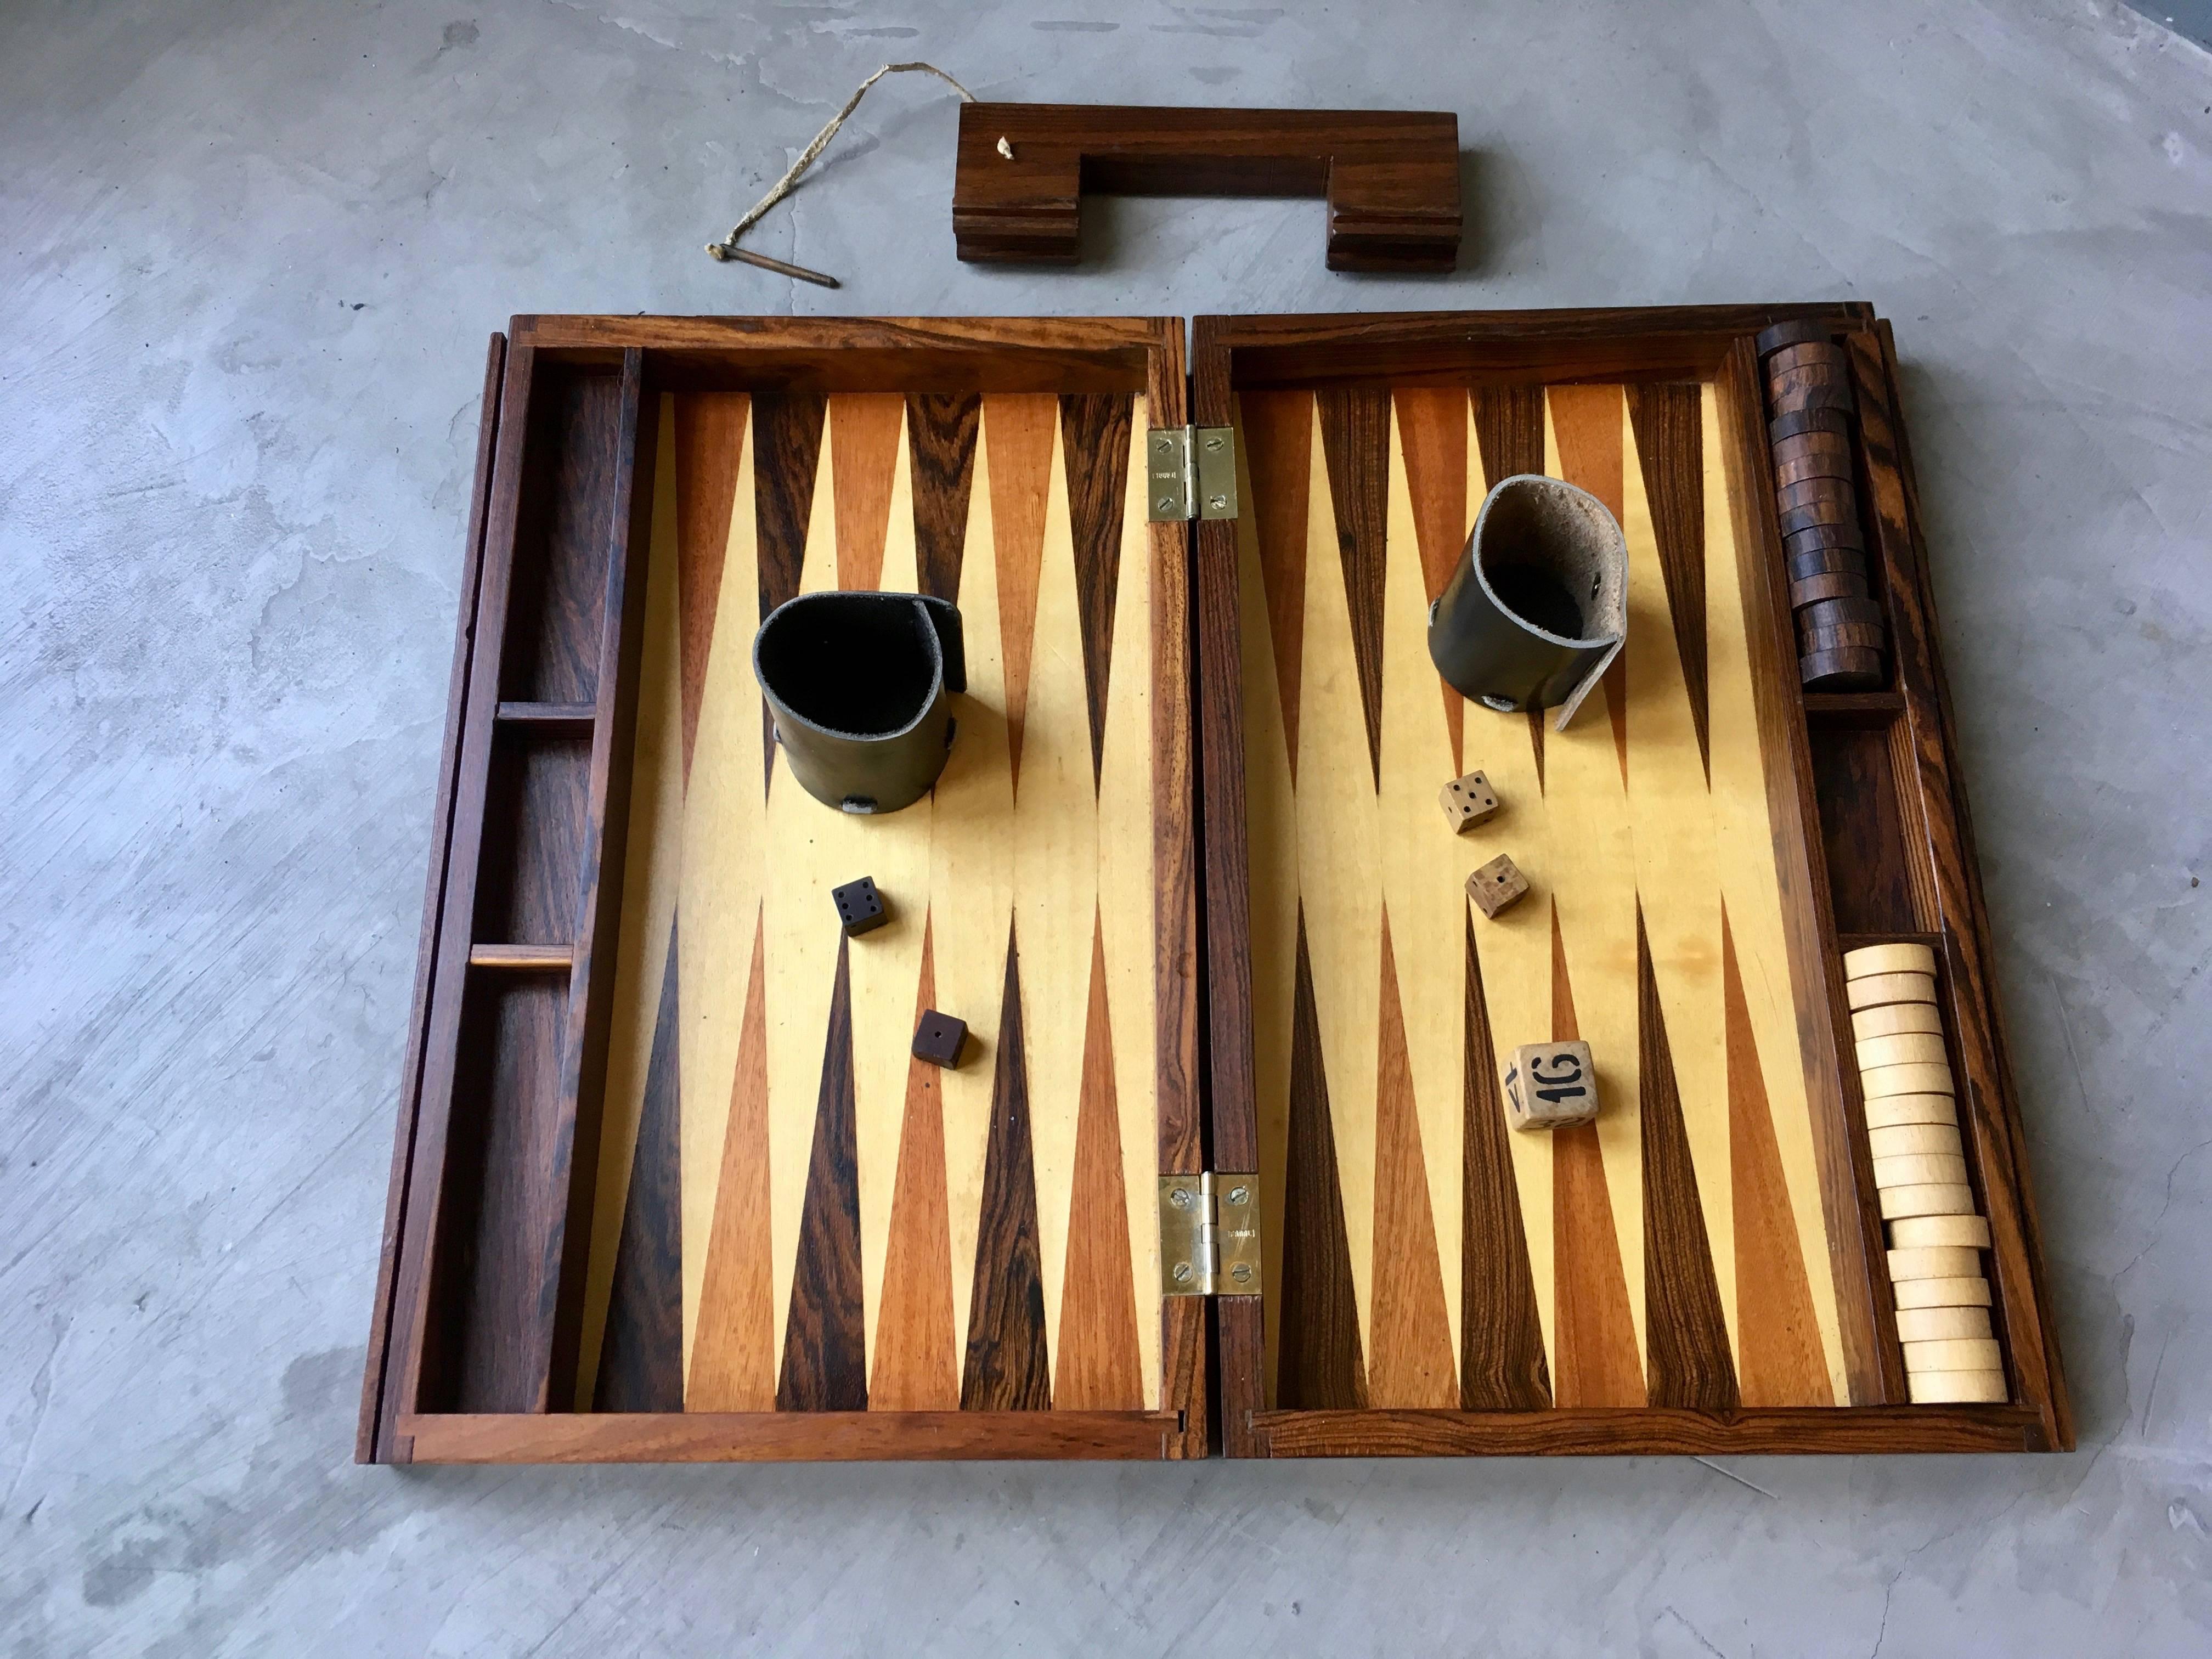 Stunning rosewood portable backgammon board. Handle slides out with inset brass pin. Board includes all pips, dice, leather cup holders and doubling cube. Gorgeous piece. Excellent condition.